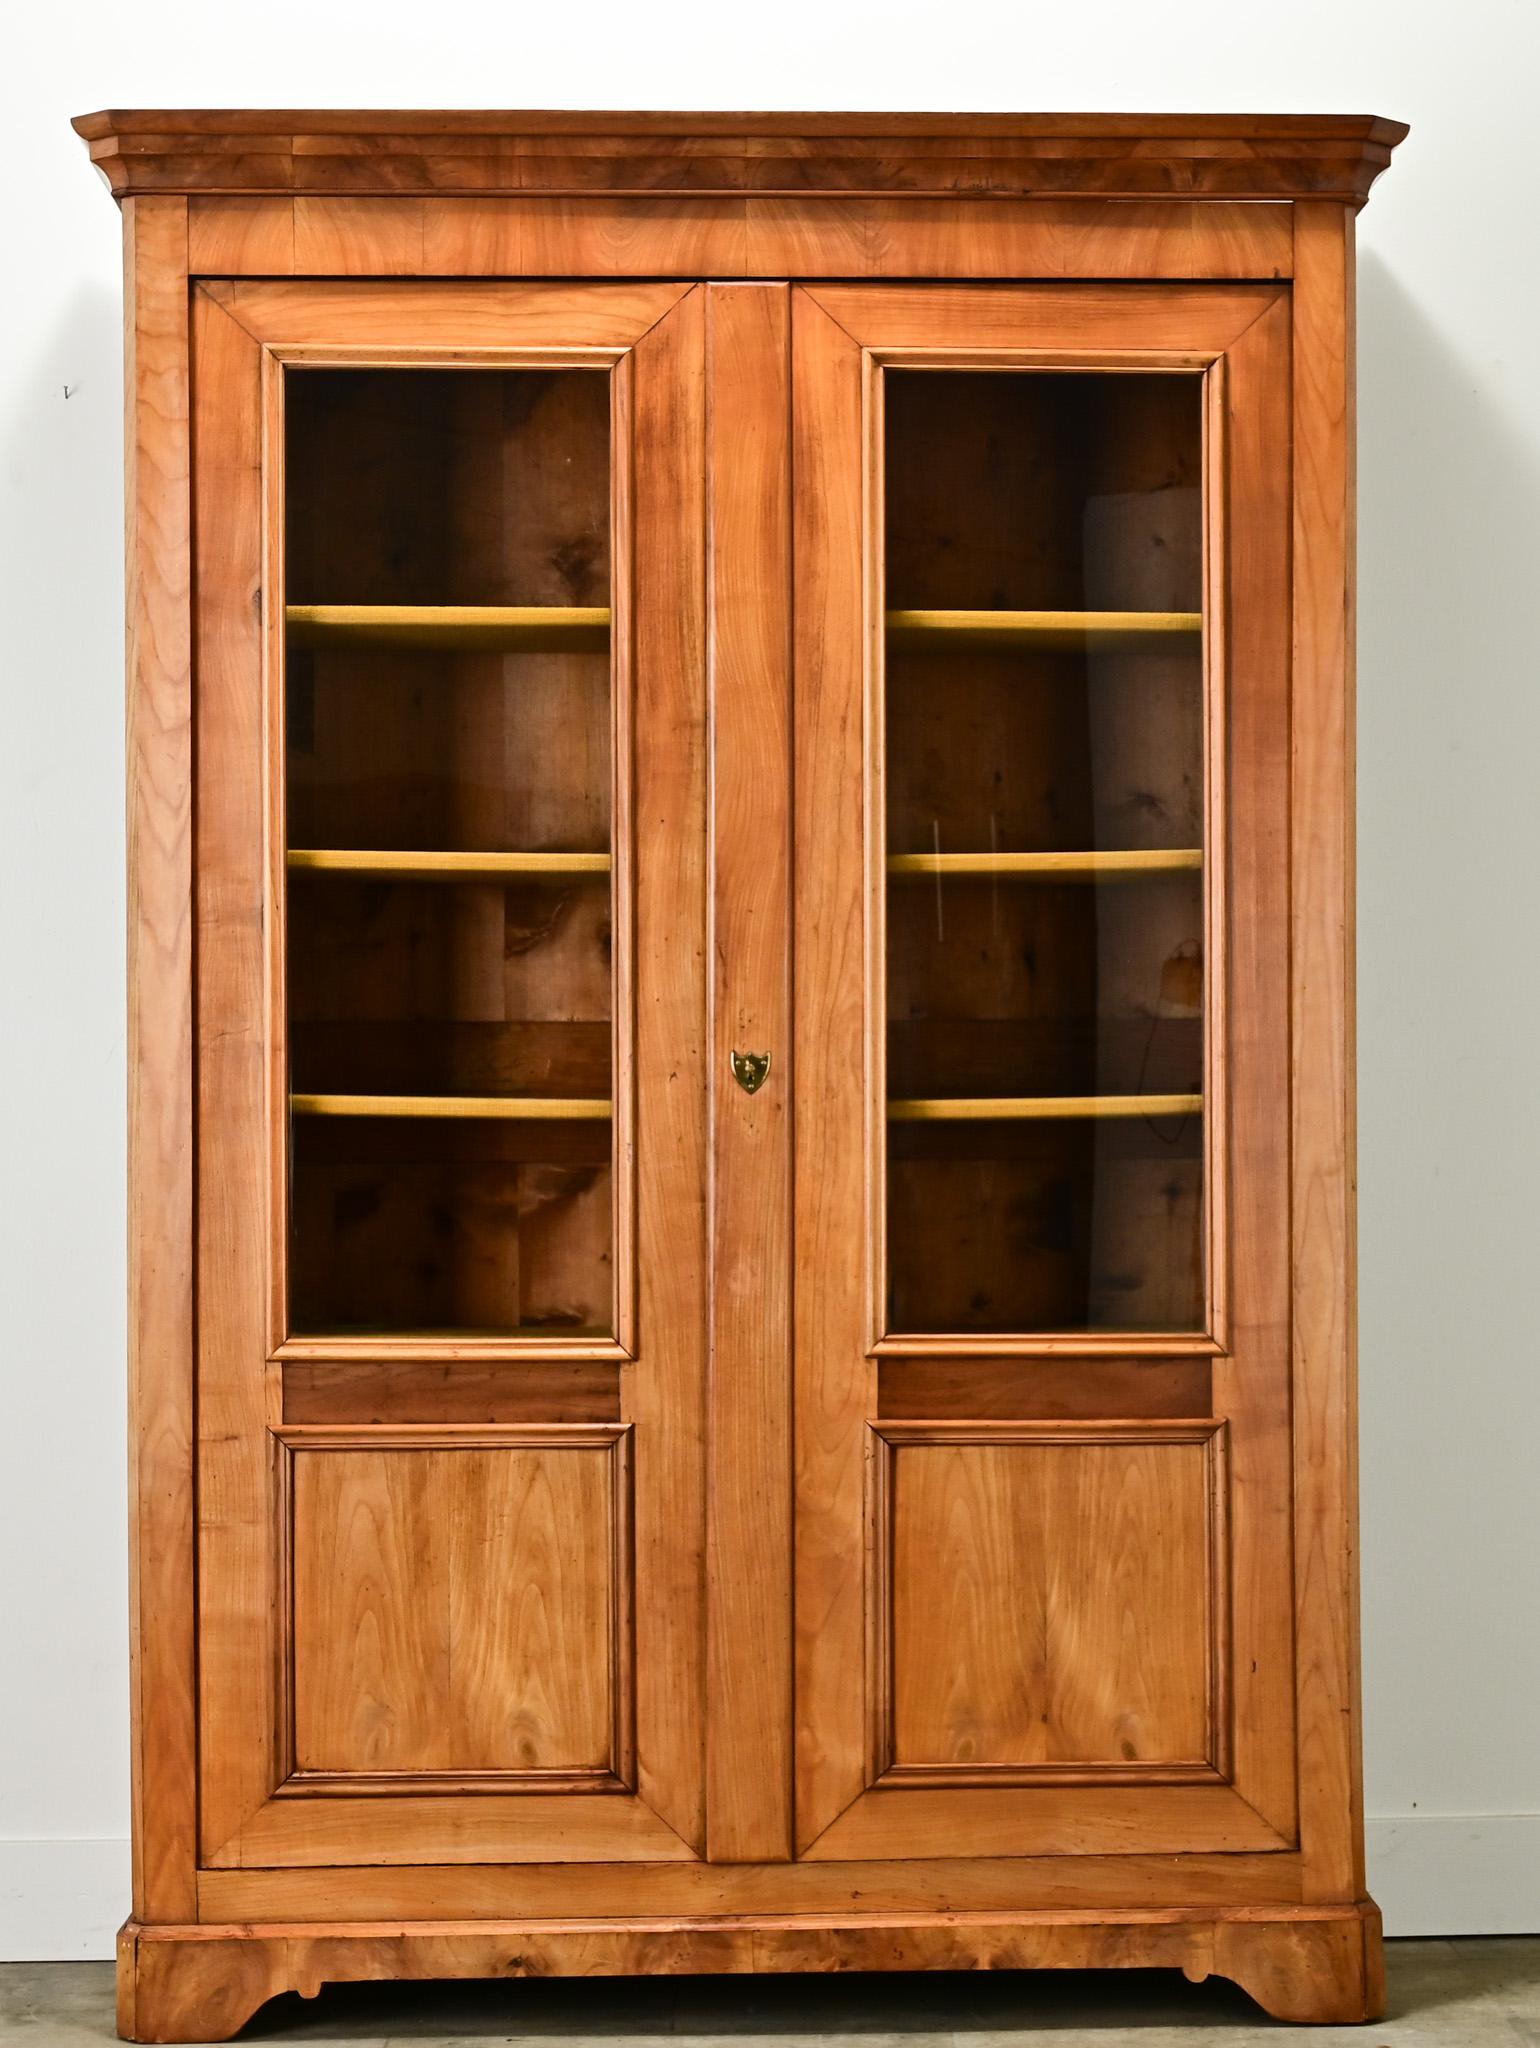 A handsome French Louis Philippe bibliotheque made of blonde mahogany. There are two paneled cabinet doors with new glass at the top that open with a functioning lock and key. The interior has four fixed pine shelves wrapped with a custom mustard